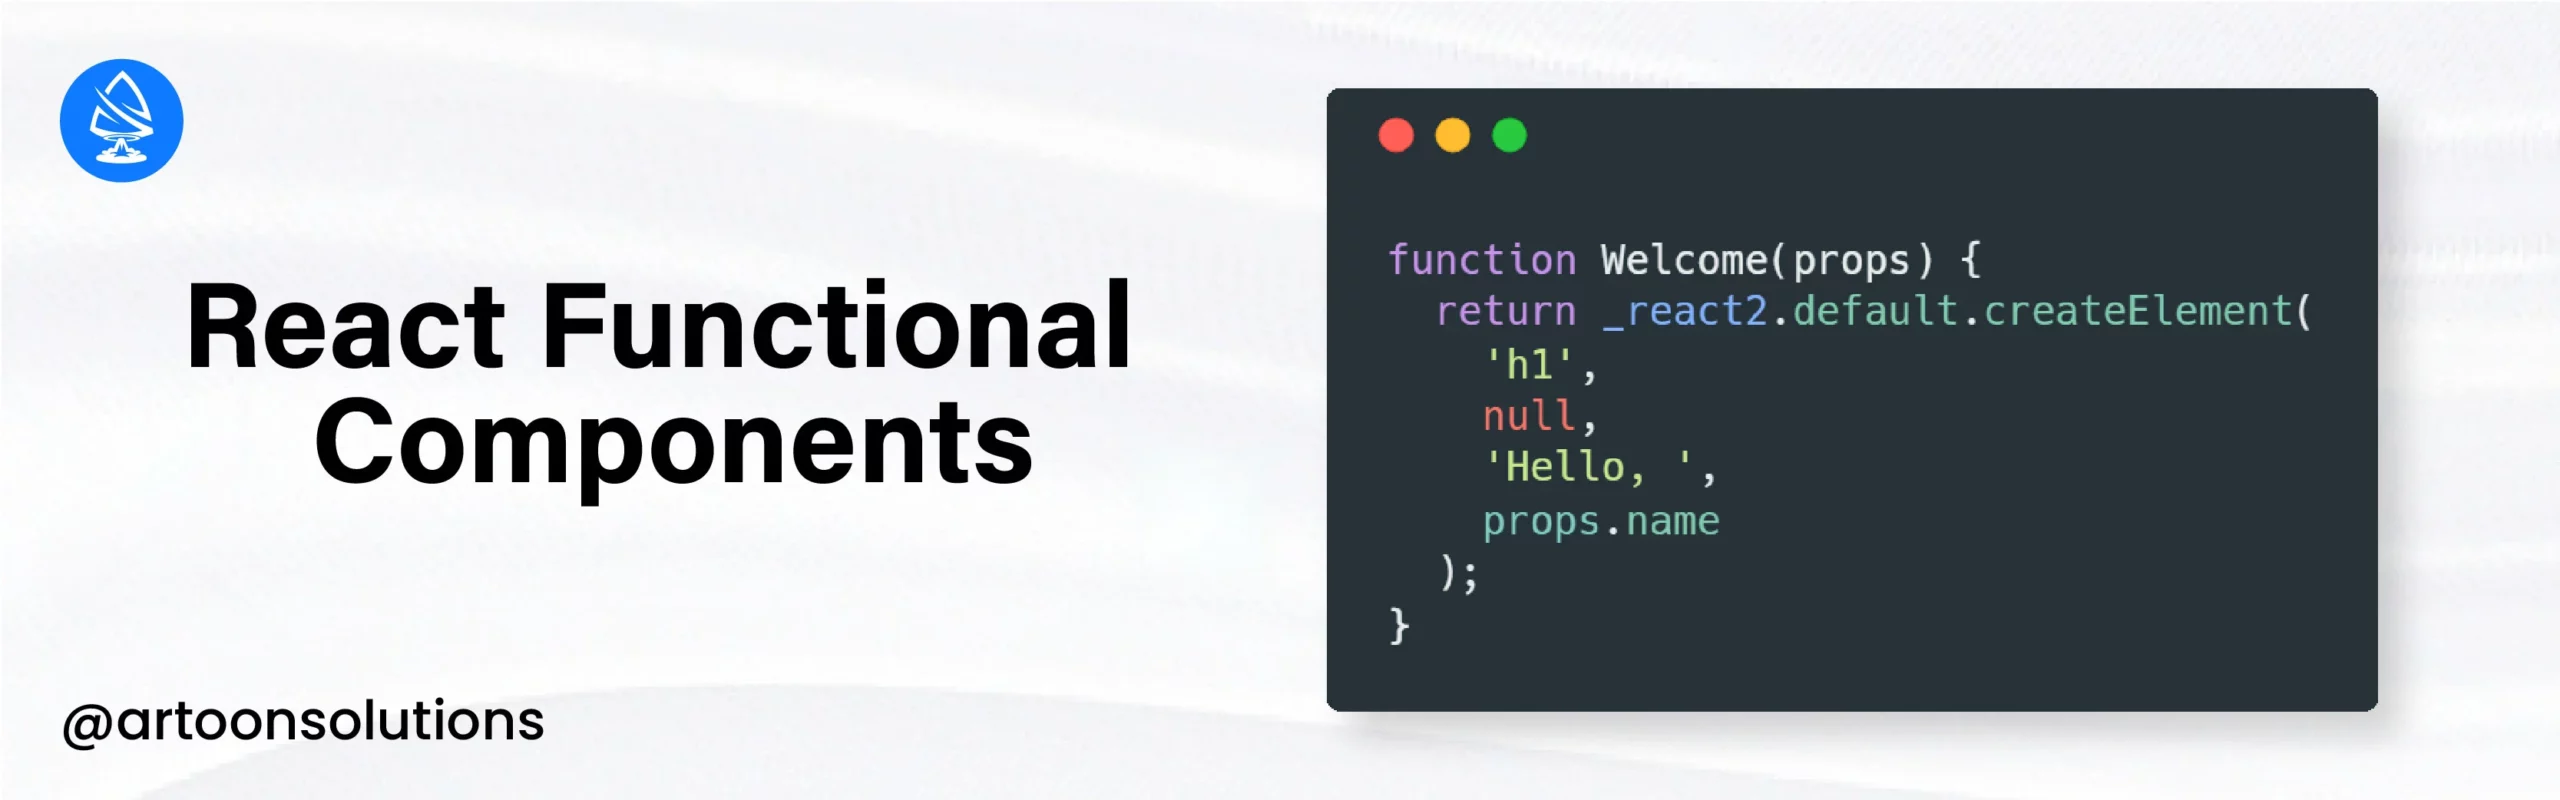 Overview of React Functional Components